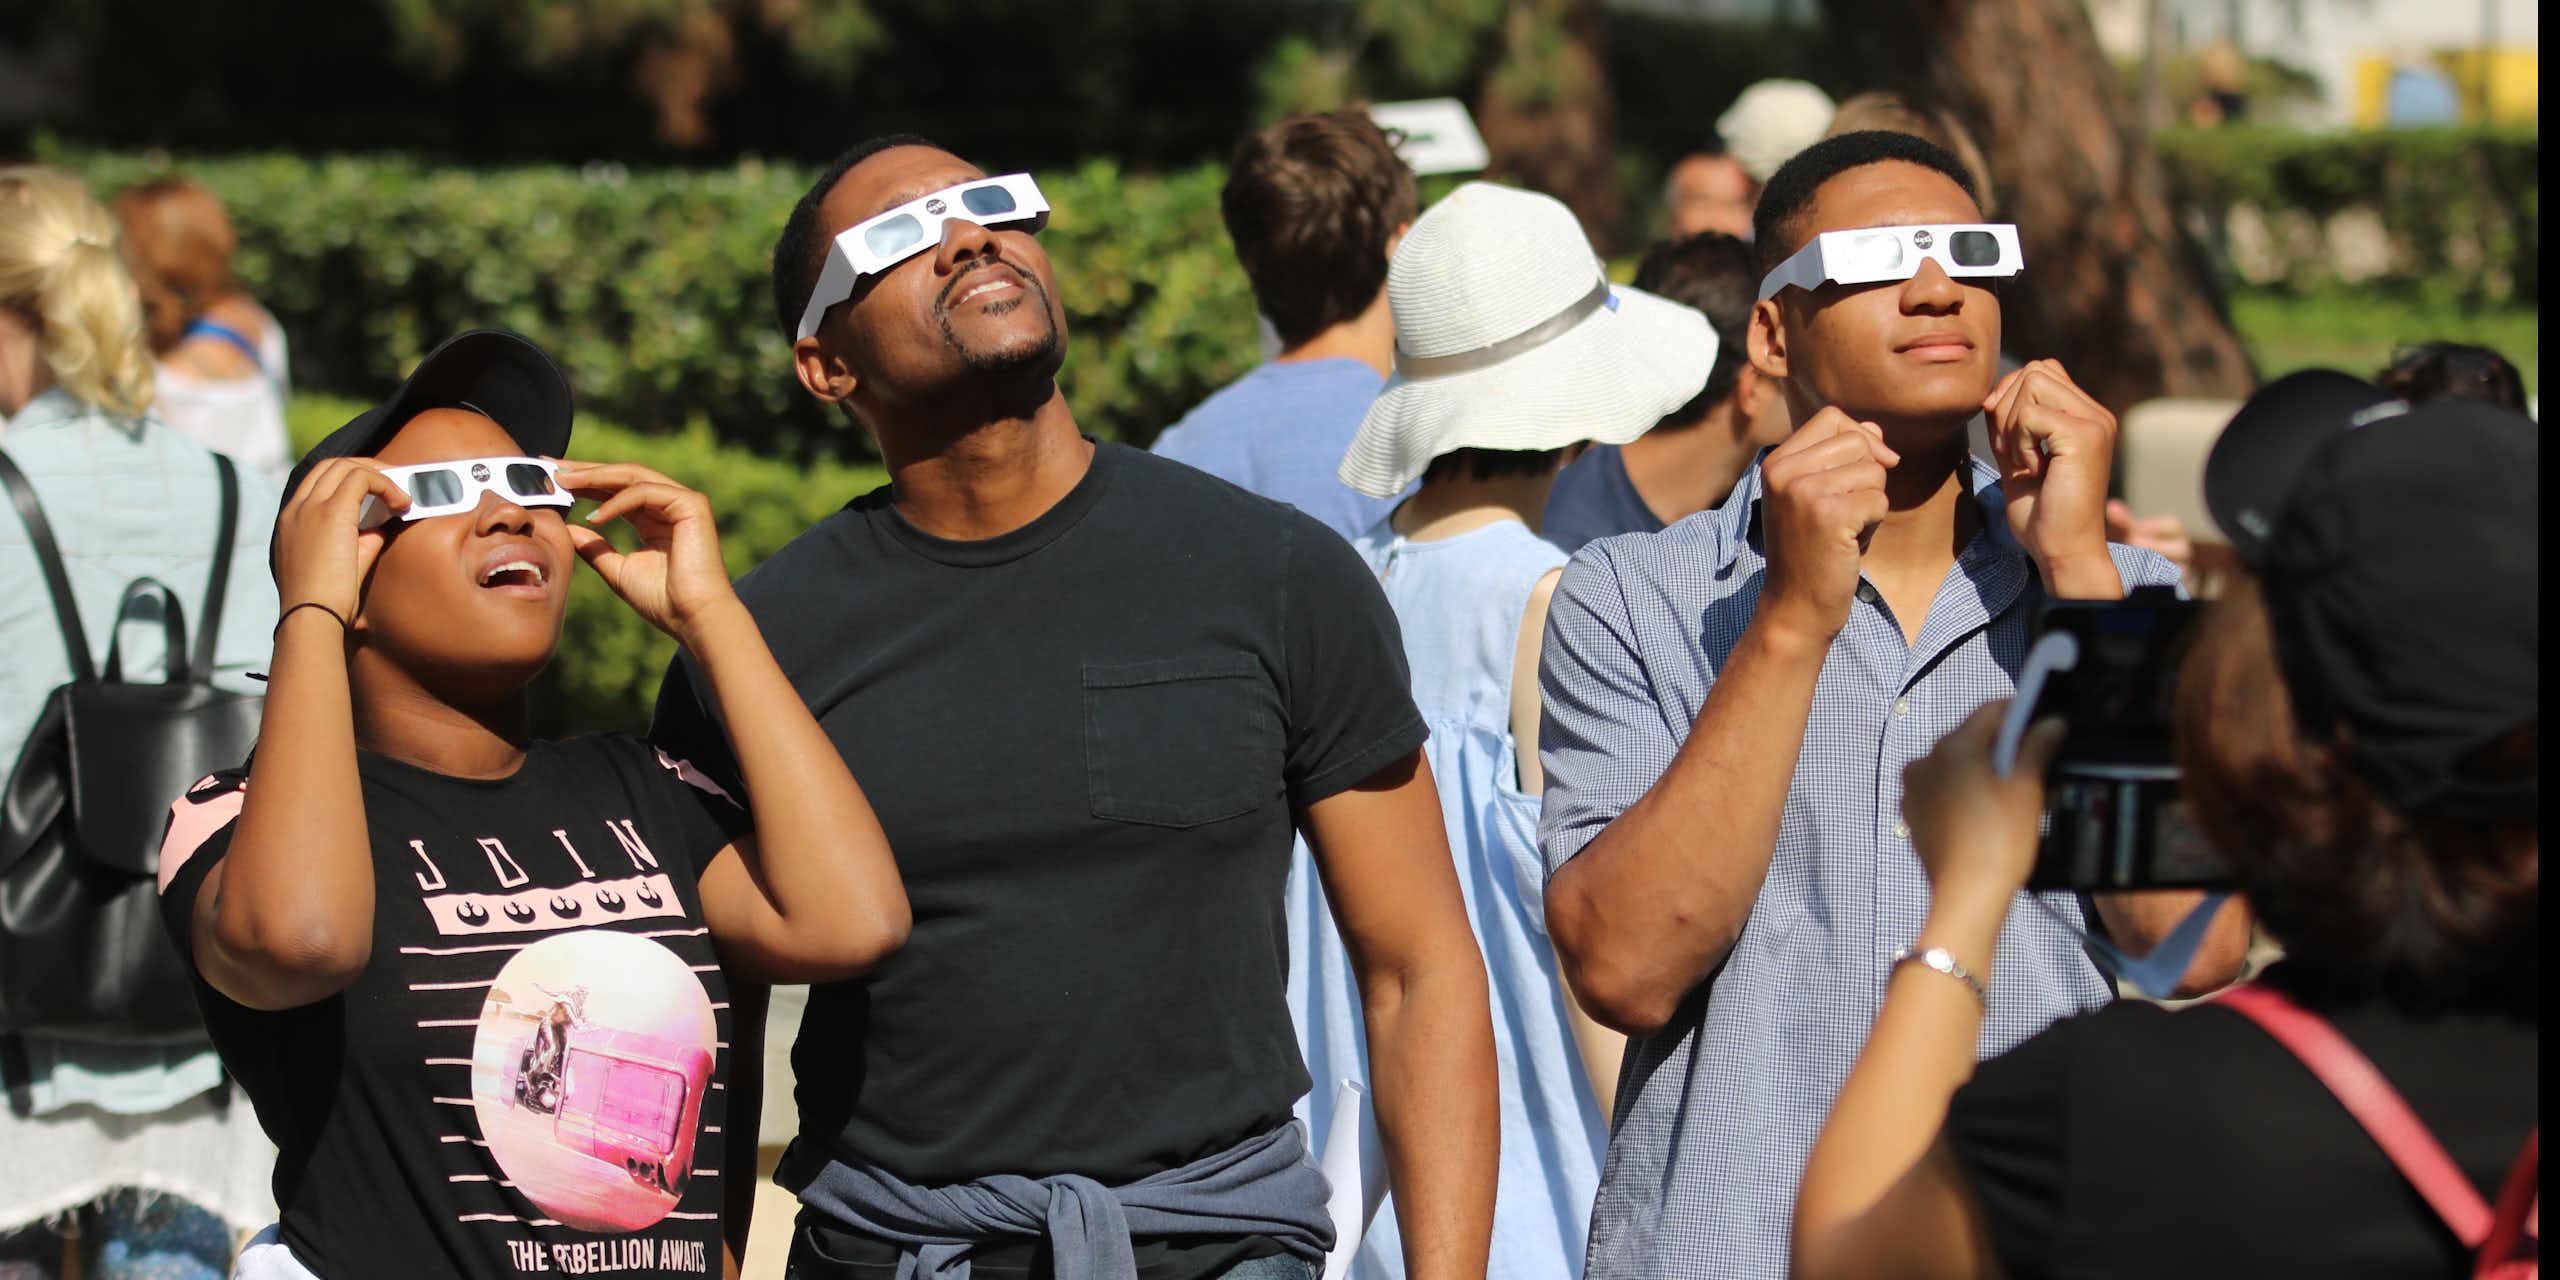 A group of people wearing eclipse glasses look up